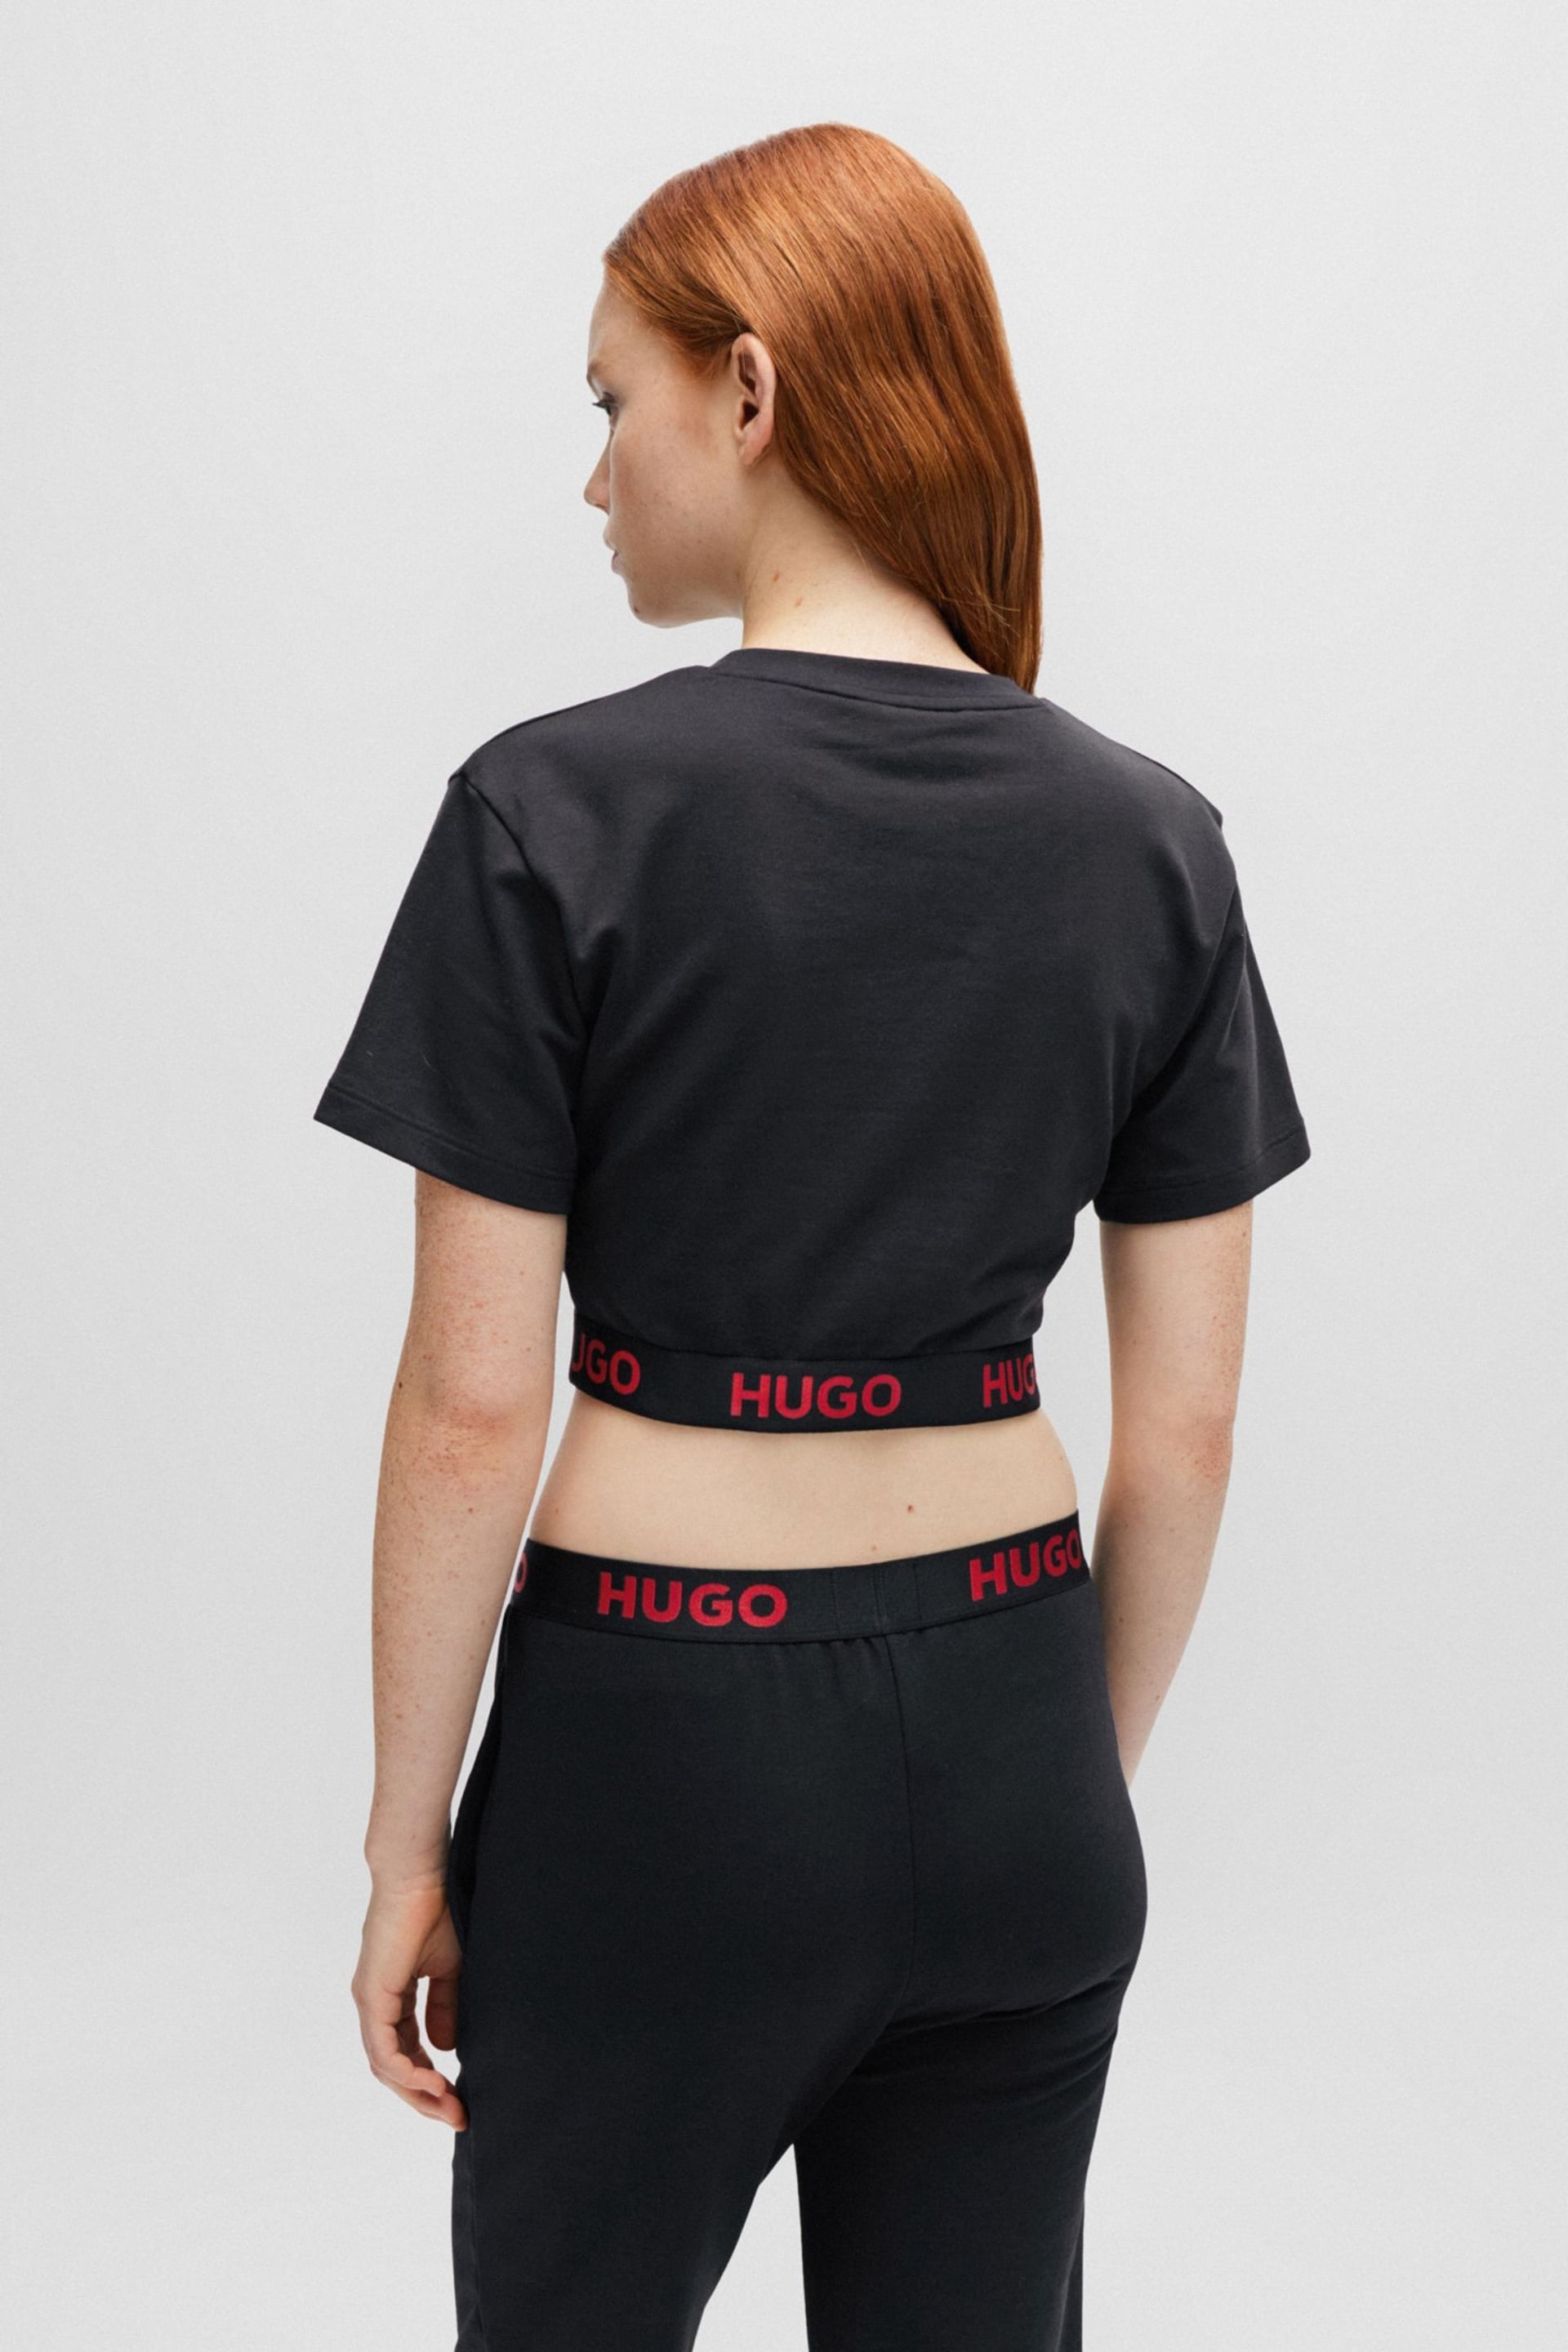 HUGO Cropped Black T-Shirt in Stretch Fabric With Logo Waistband Crop Top - Image 3 of 6